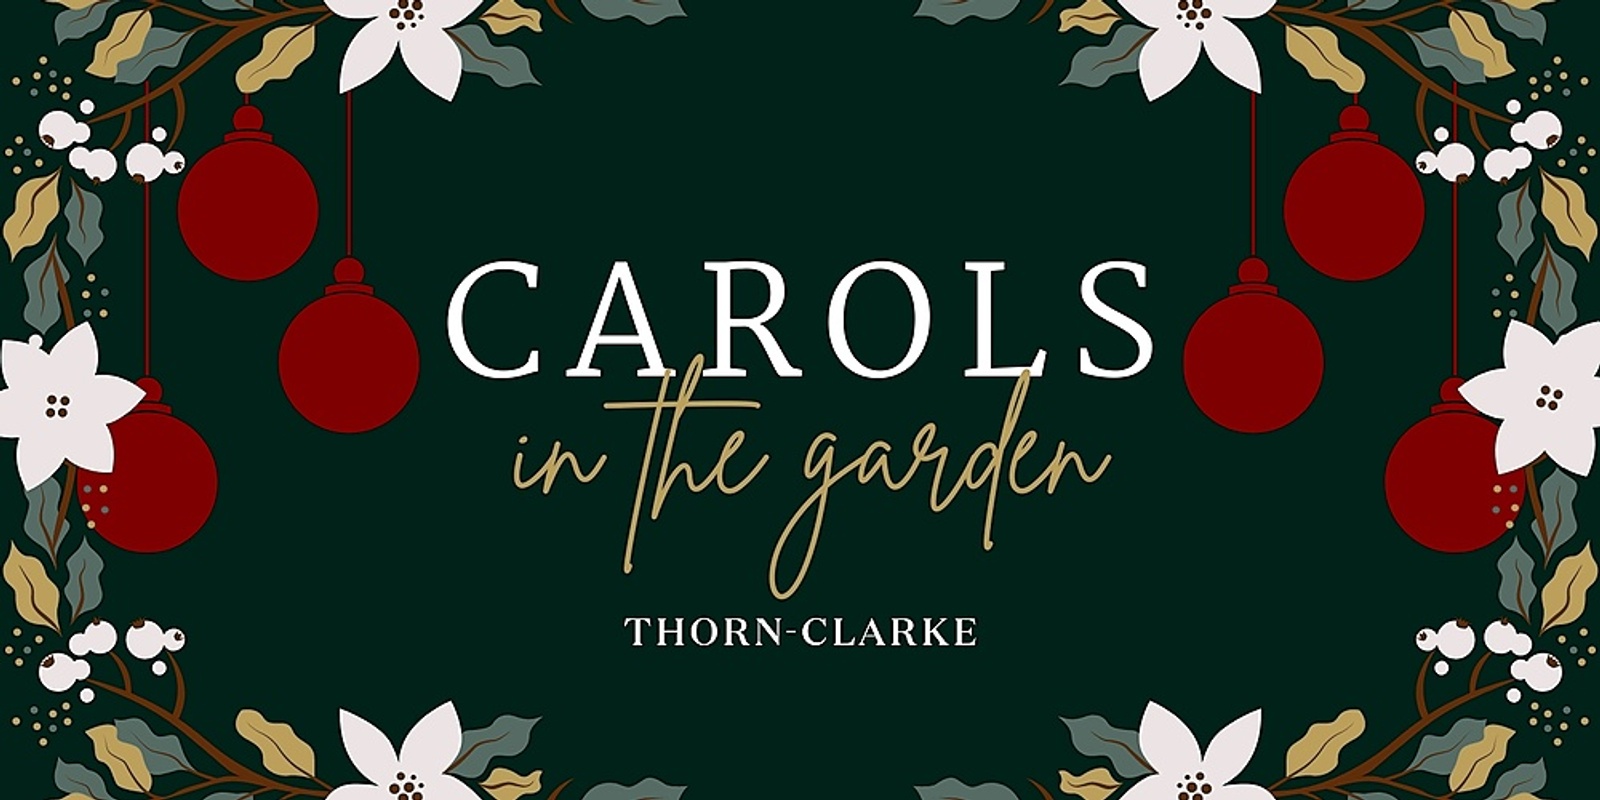 Banner image for Carols in the Garden at Thorn-Clarke